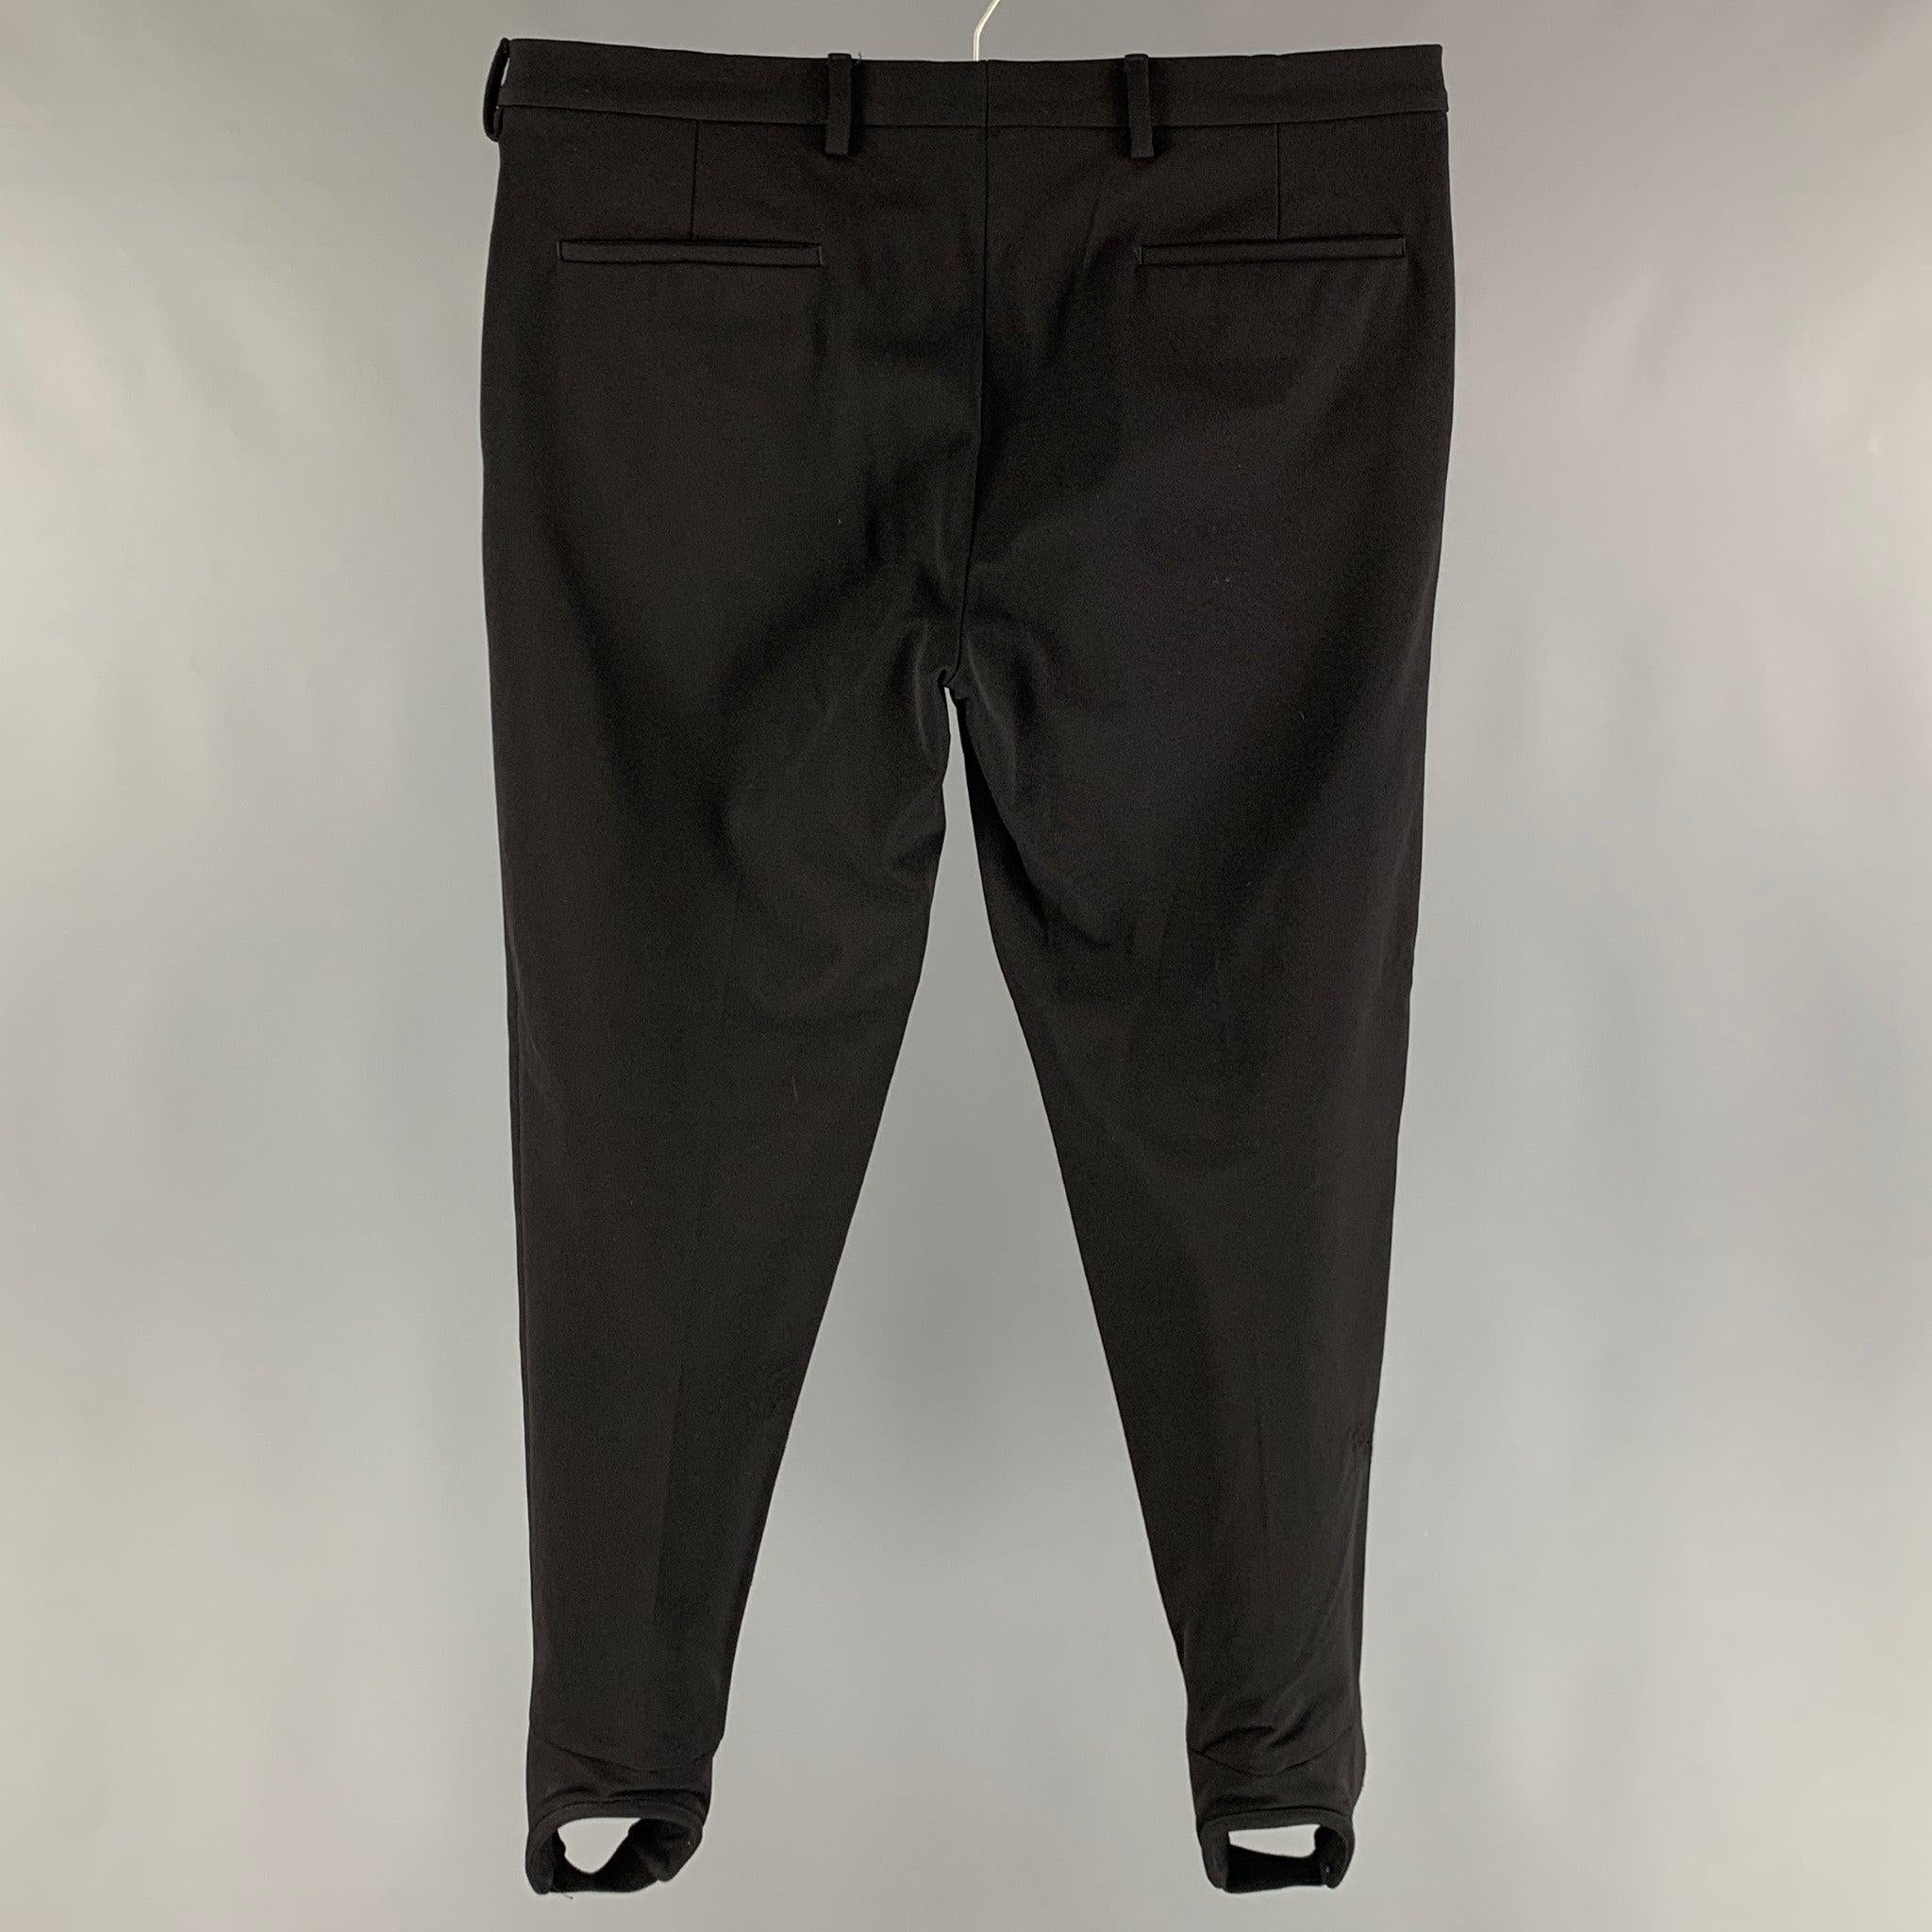 PRADA 2007 dress pants comes in a black nylon blend fleece material featuring a jodhpurs style, flat front, front tab, and a button closure. Made in Italy. Very Good Pre-Owned Condition. As- Is. 

Marked:  52 

Measurements: 
 Waist: 37 inches Rise: